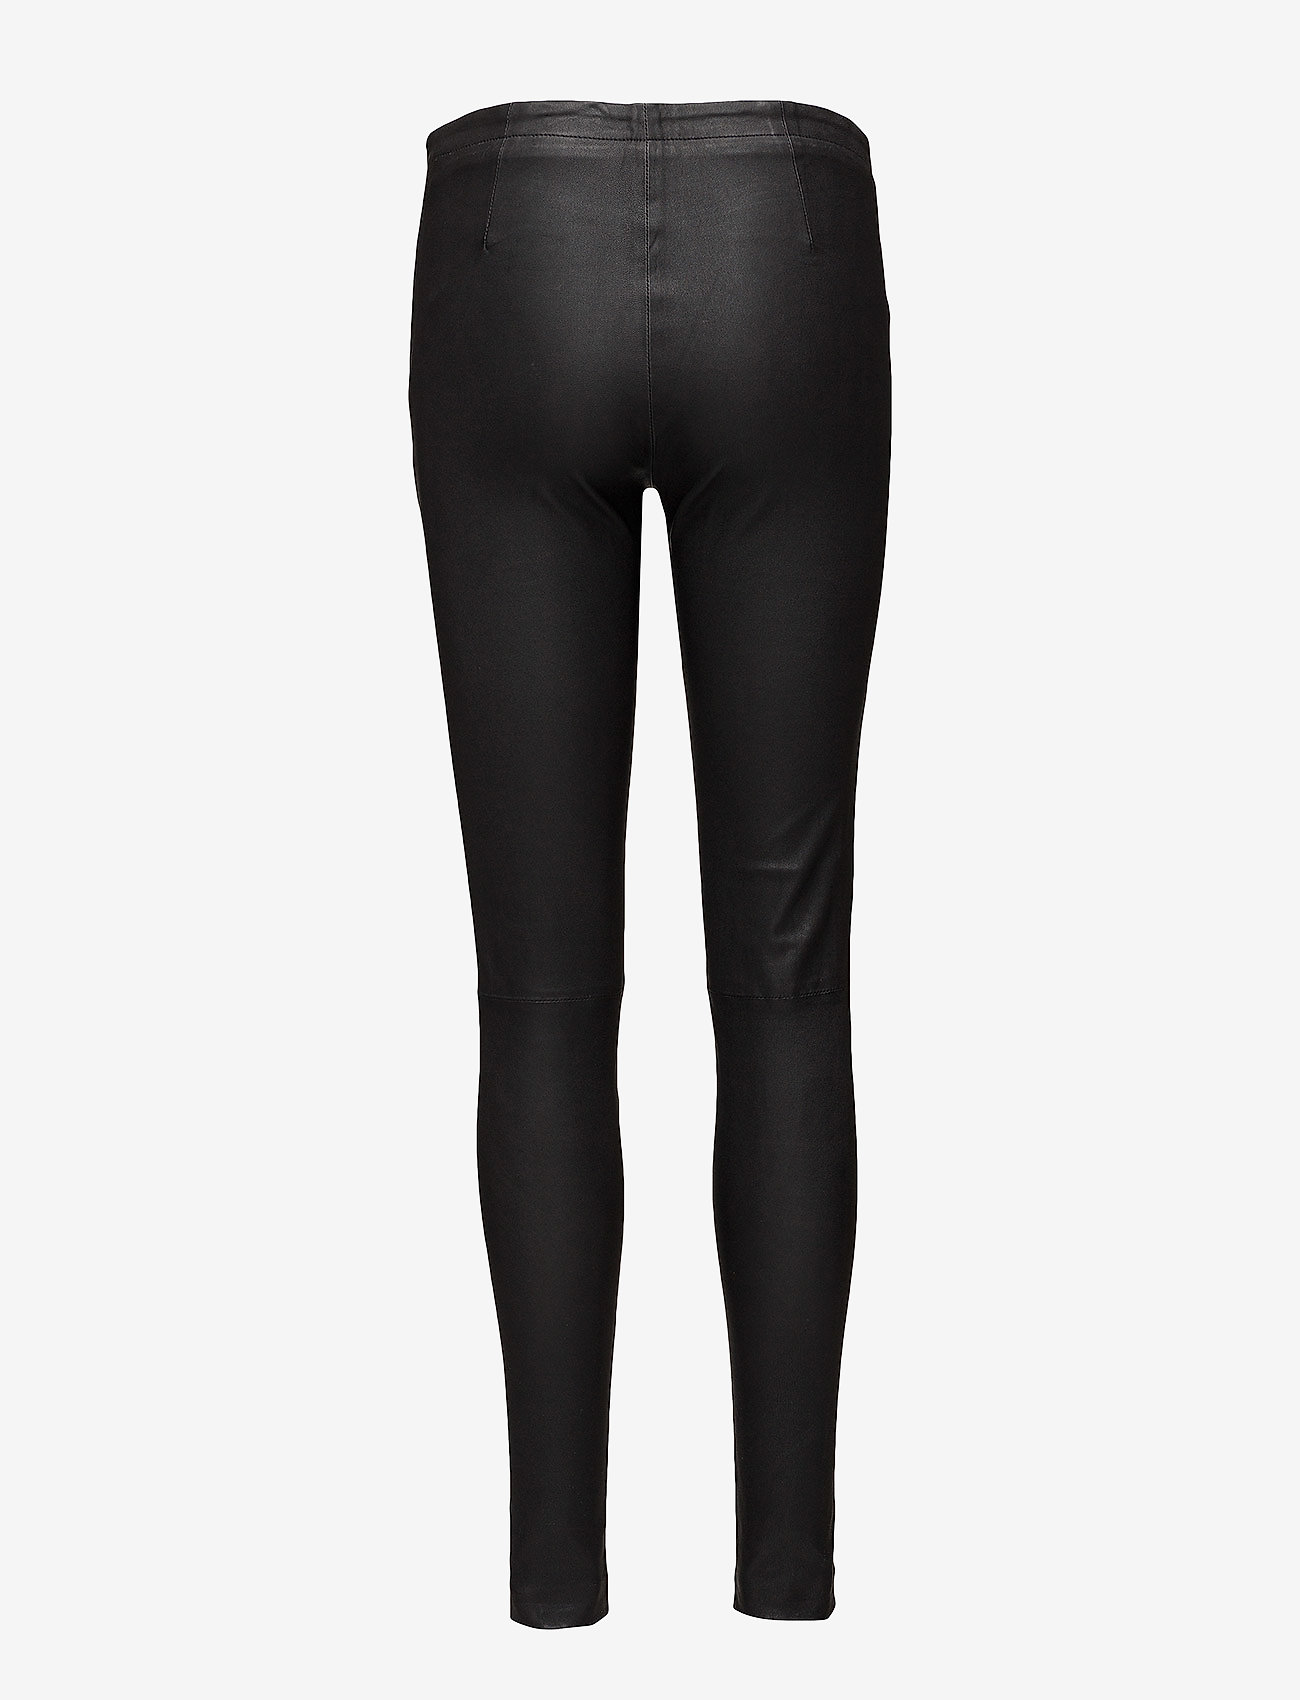 Rosemunde - Leather trousers - leather trousers - black - 1